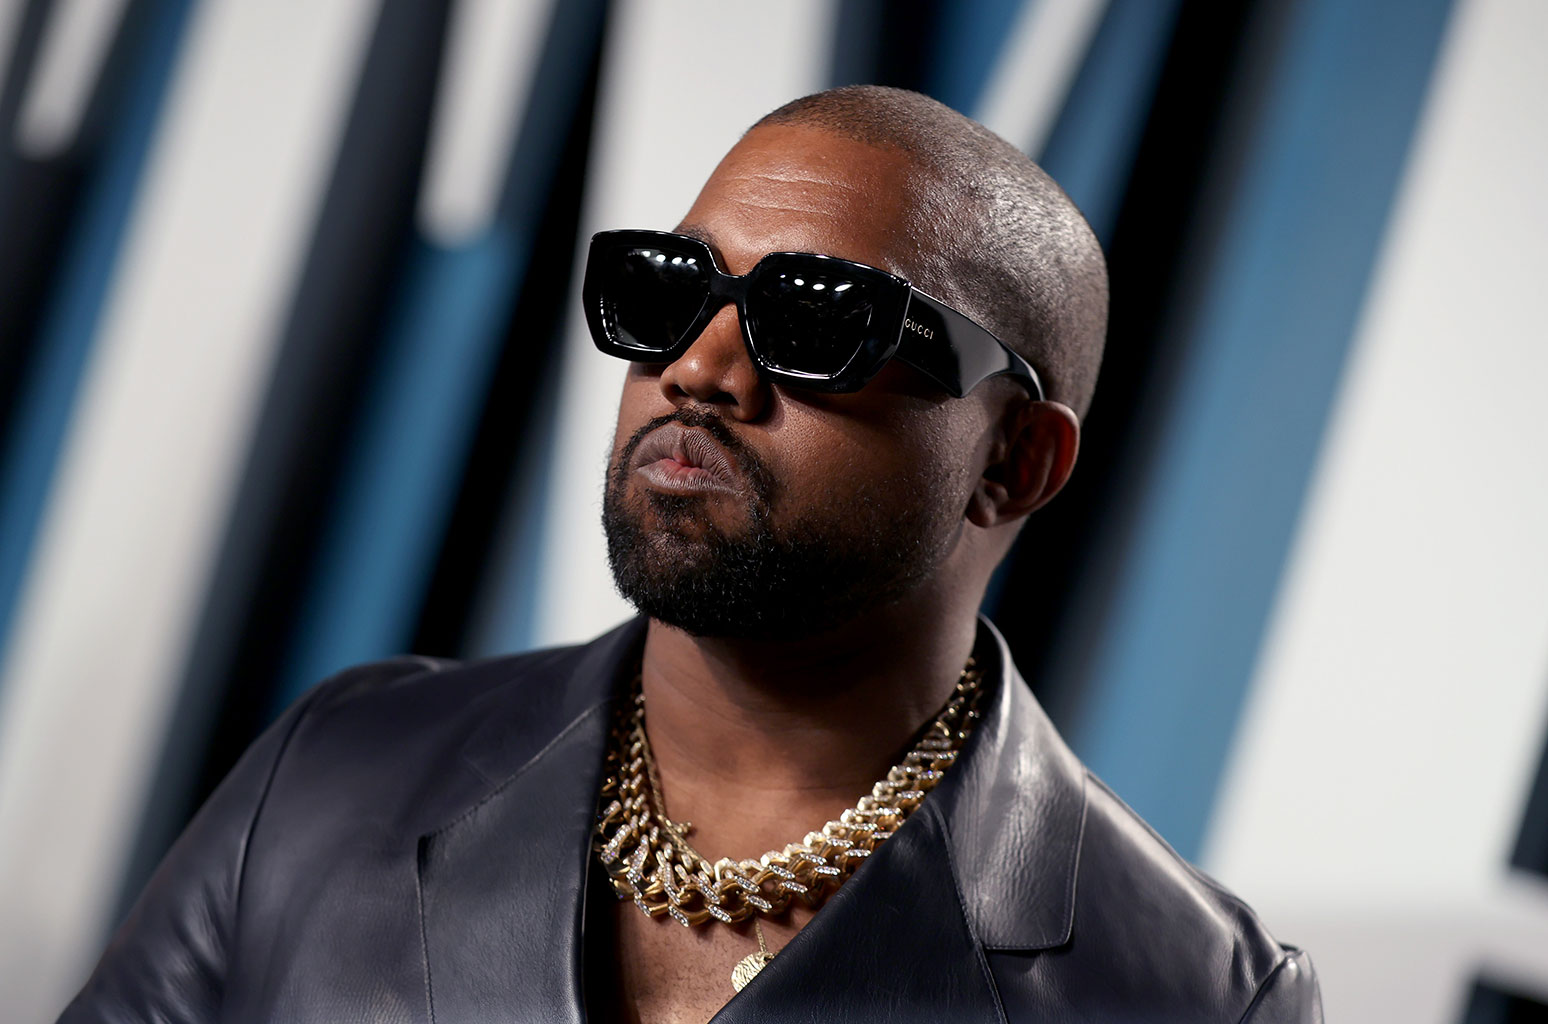 Artist Kanye West is ready to release a new album this Tuesday along with new endeavors